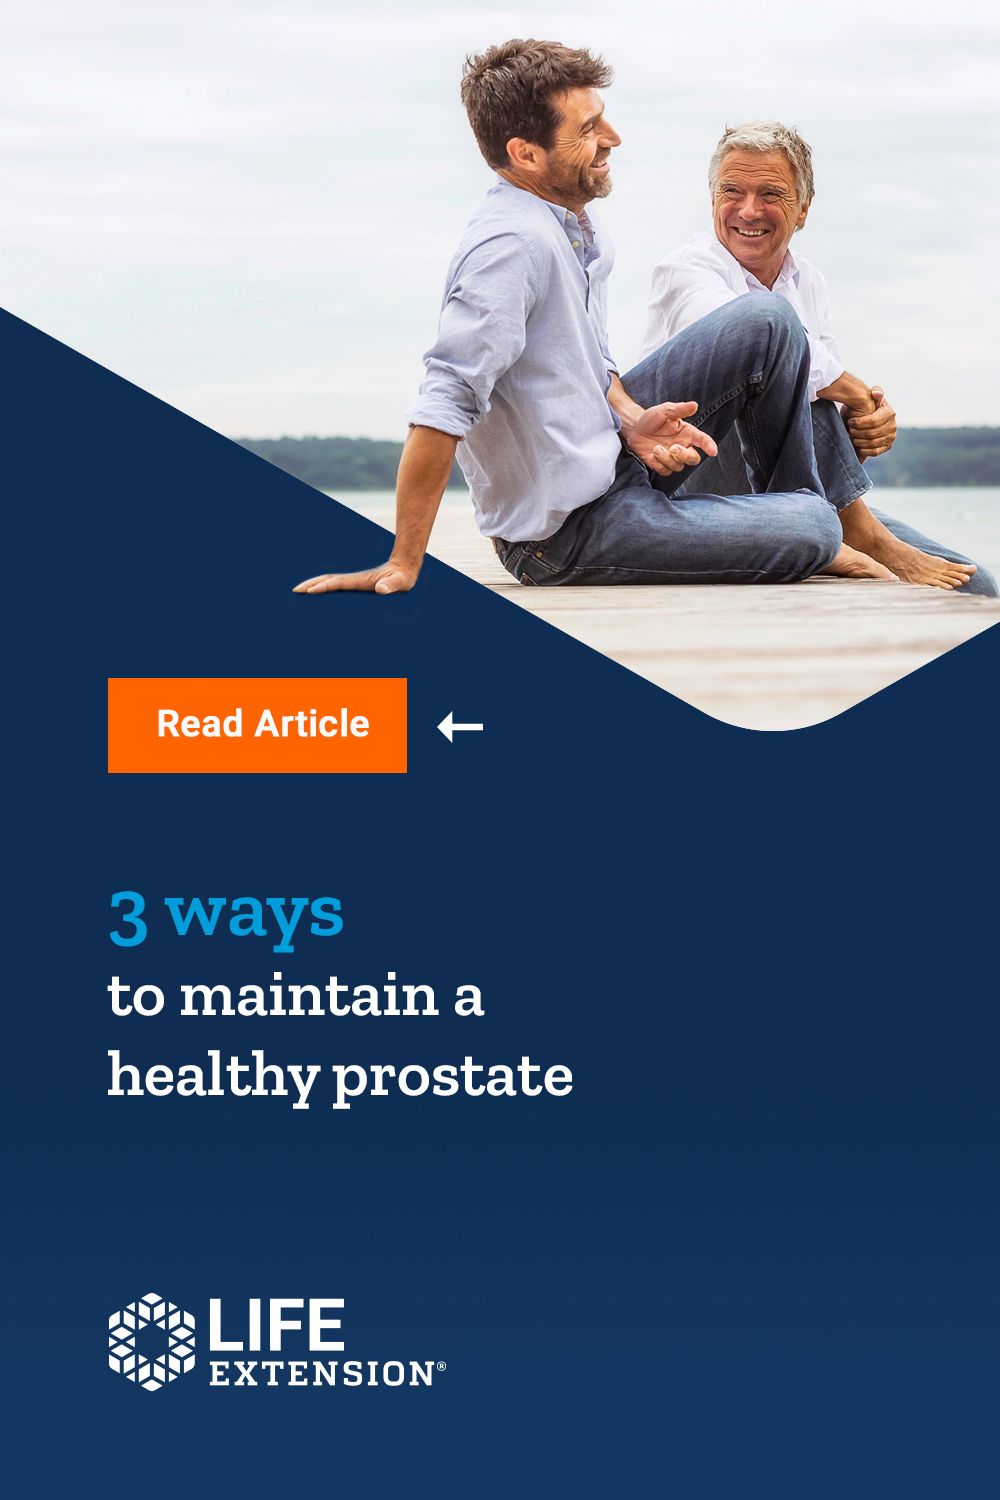 3 Ways to Maintain a Healthy Prostate in 2020